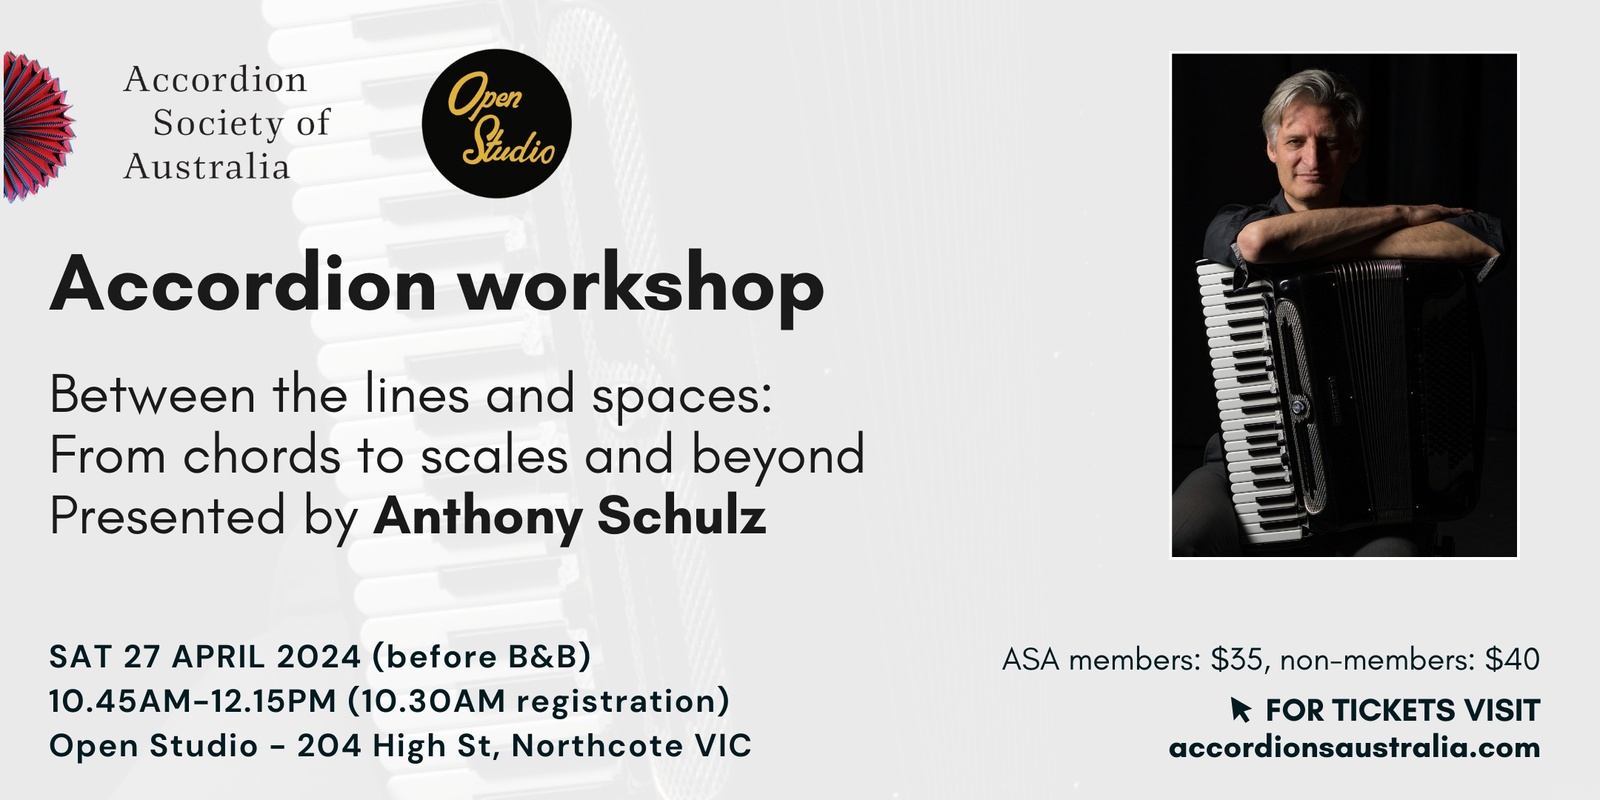 Banner image for Accordion workshop - Between the lines and spaces: From chords to scales and beyond, presented by Anthony Schulz